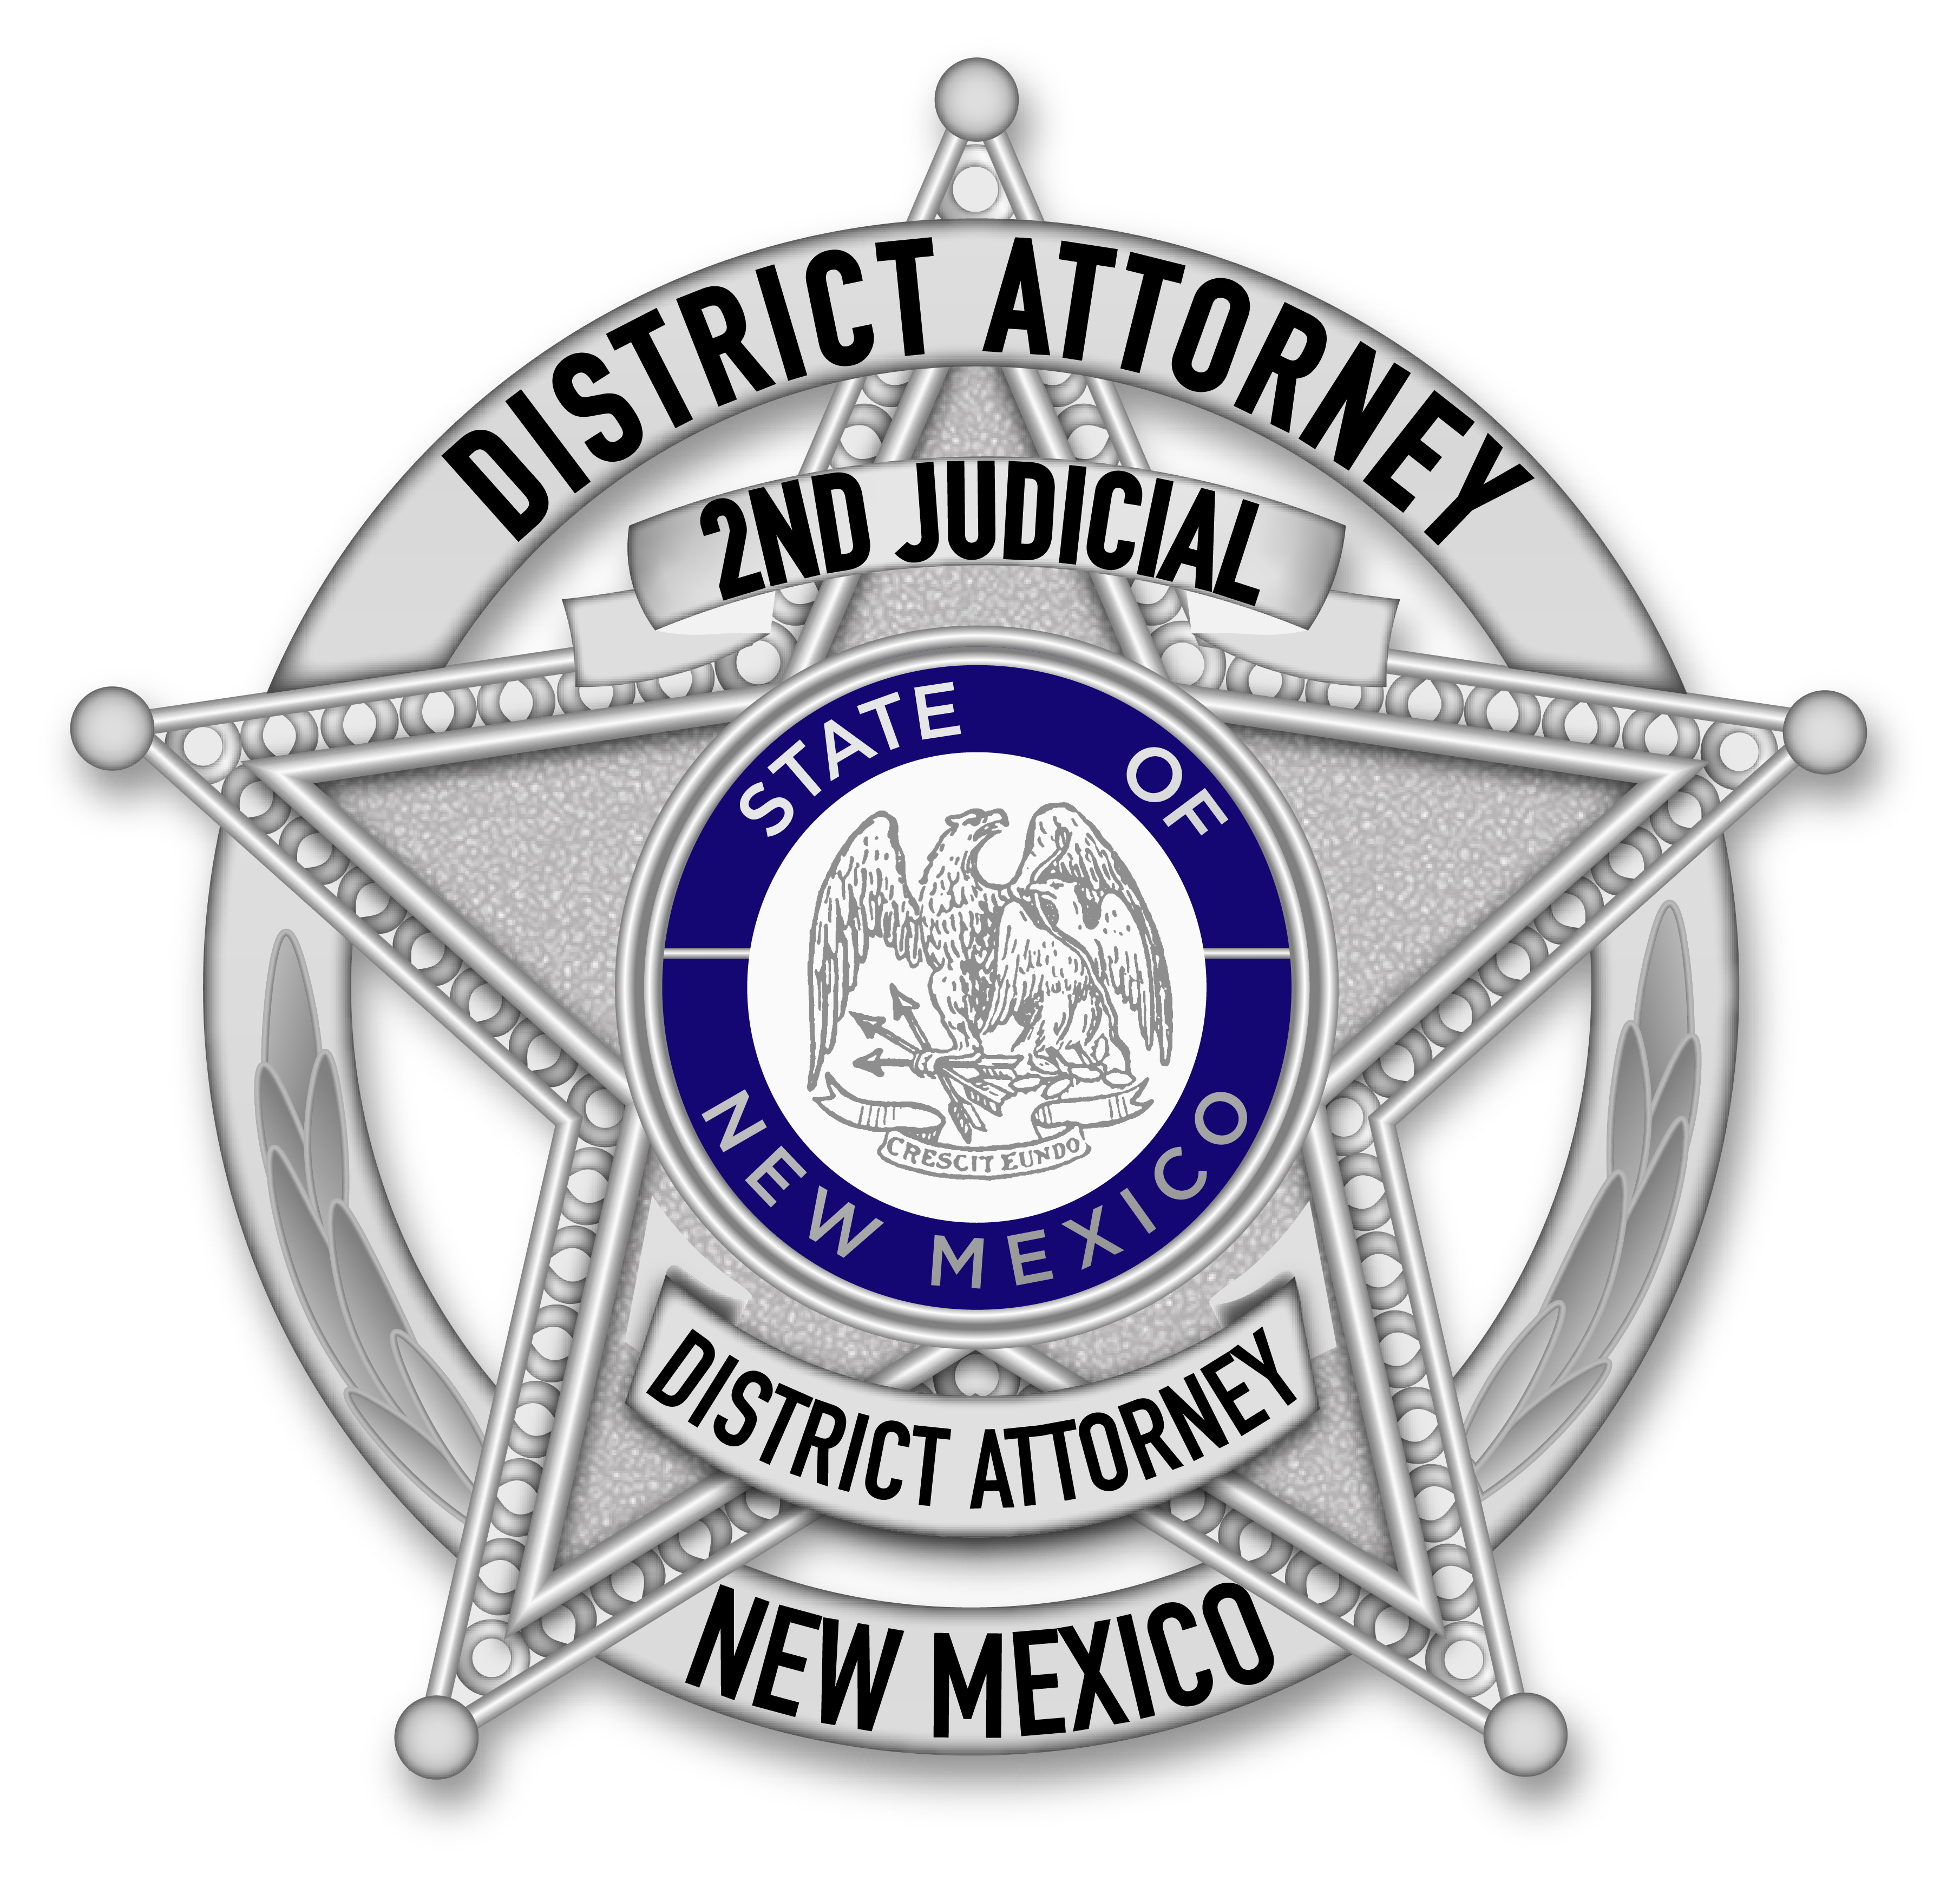 A badge with the New Mexico crest in the middle of it.